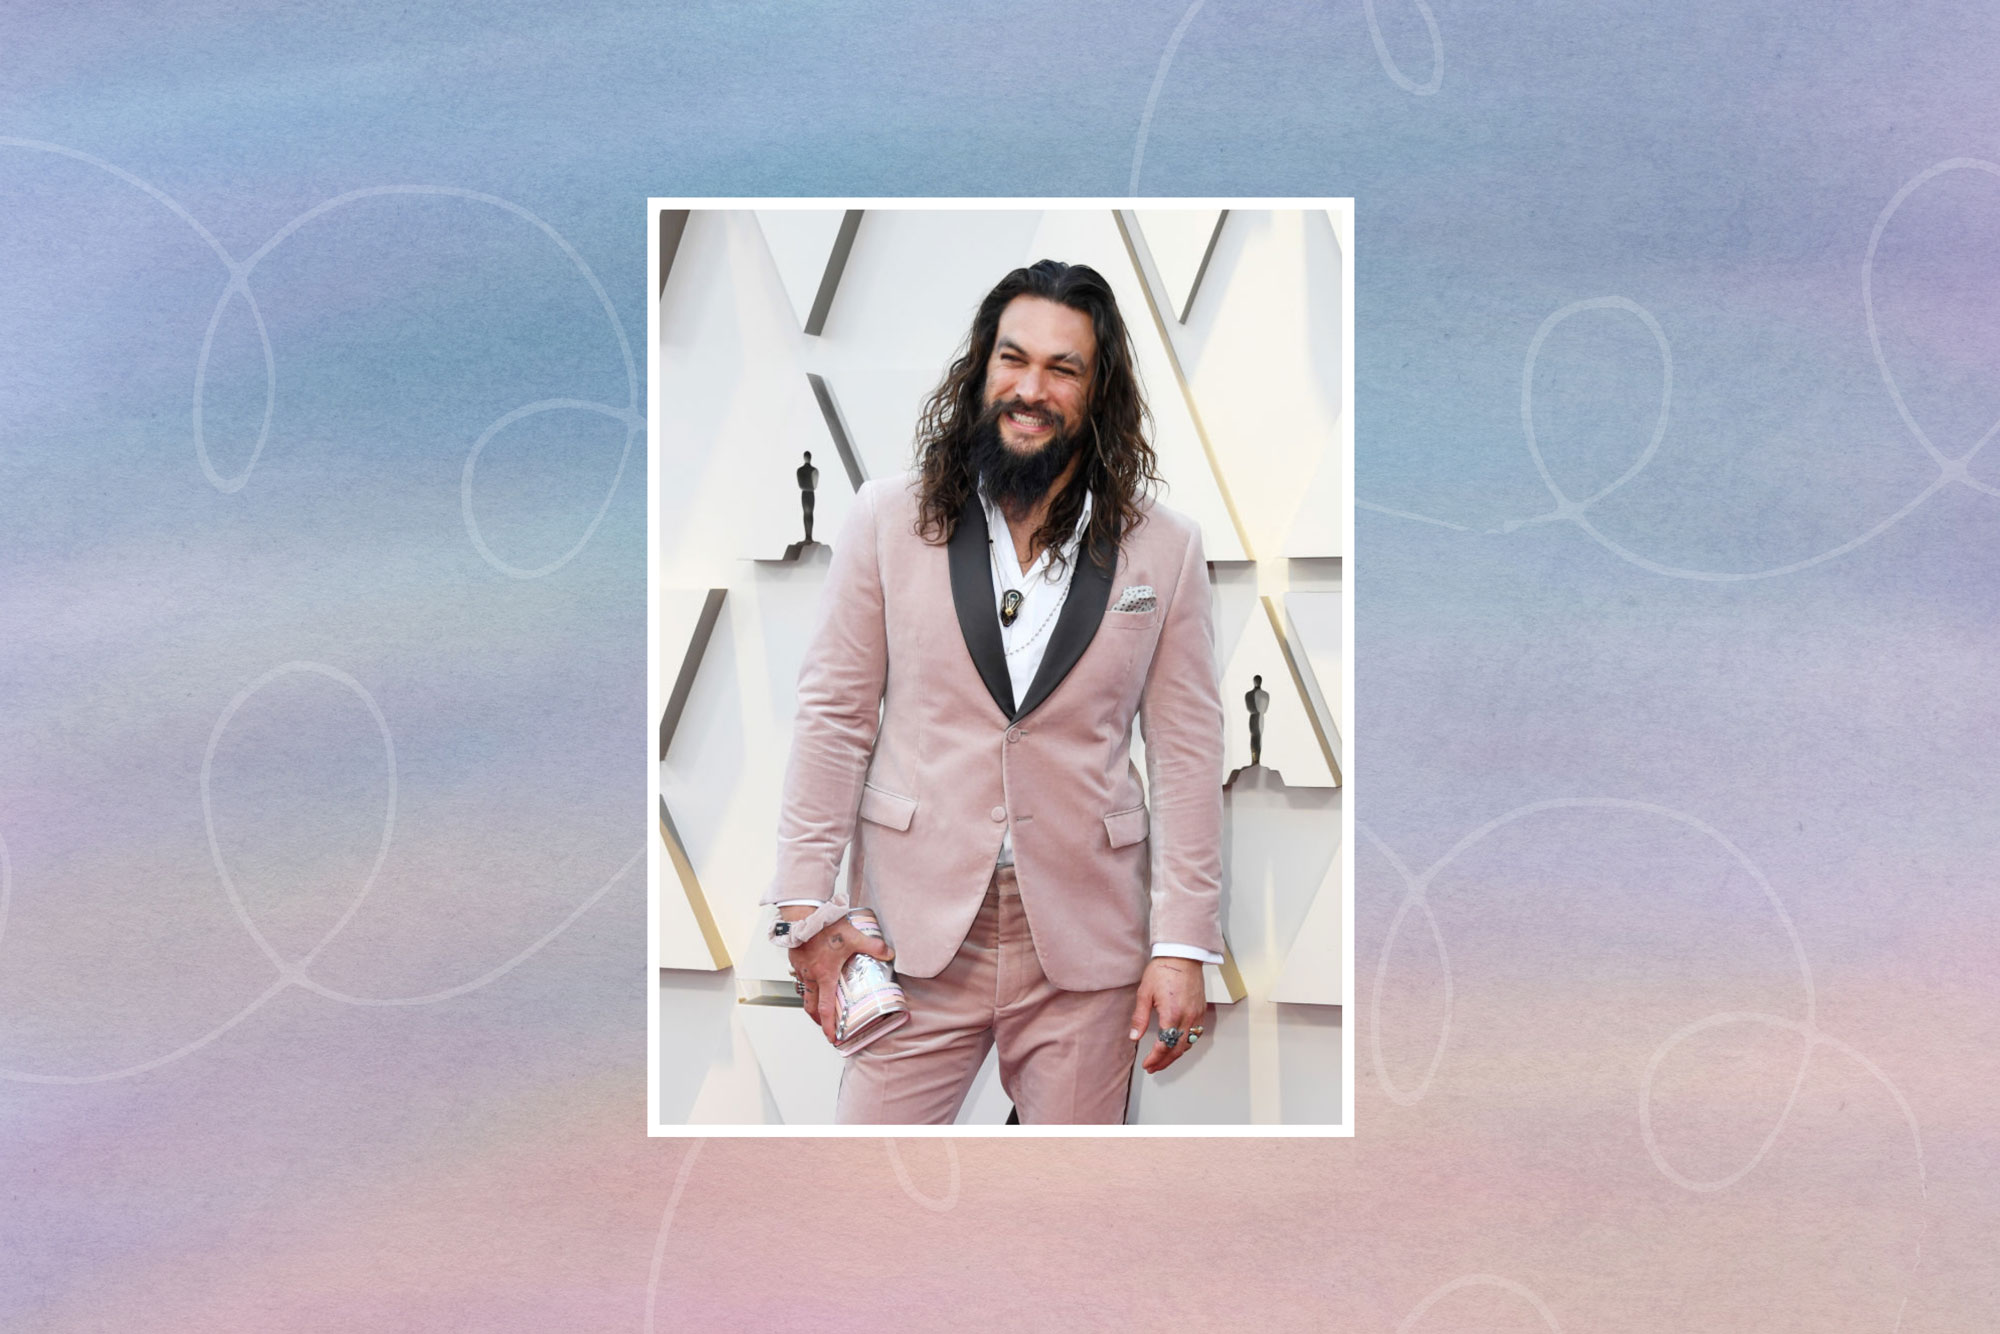 Collage of Jason Mamoa in Academy Awards red carpet on pink and blue texture background